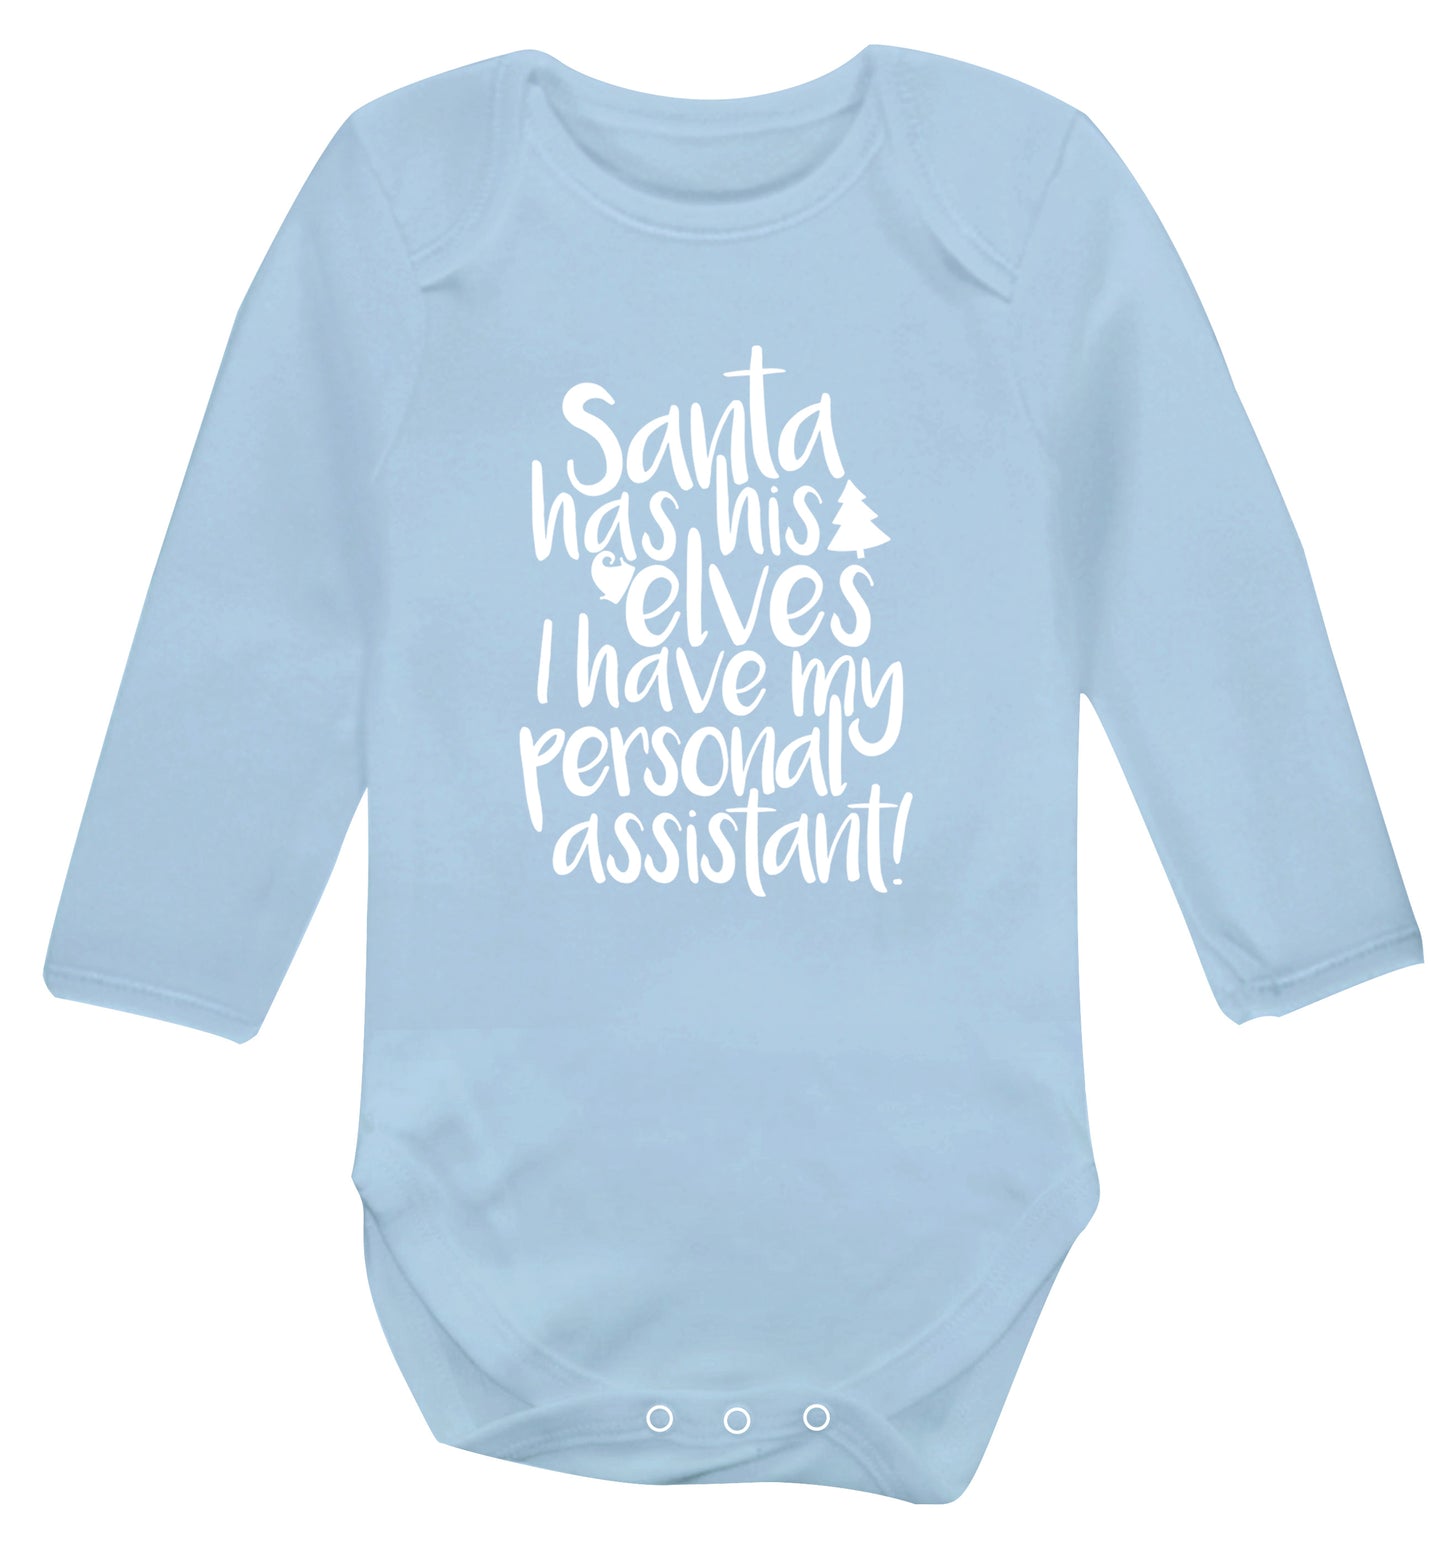 Santa has his elves I have my personal assistant Baby Vest long sleeved pale blue 6-12 months